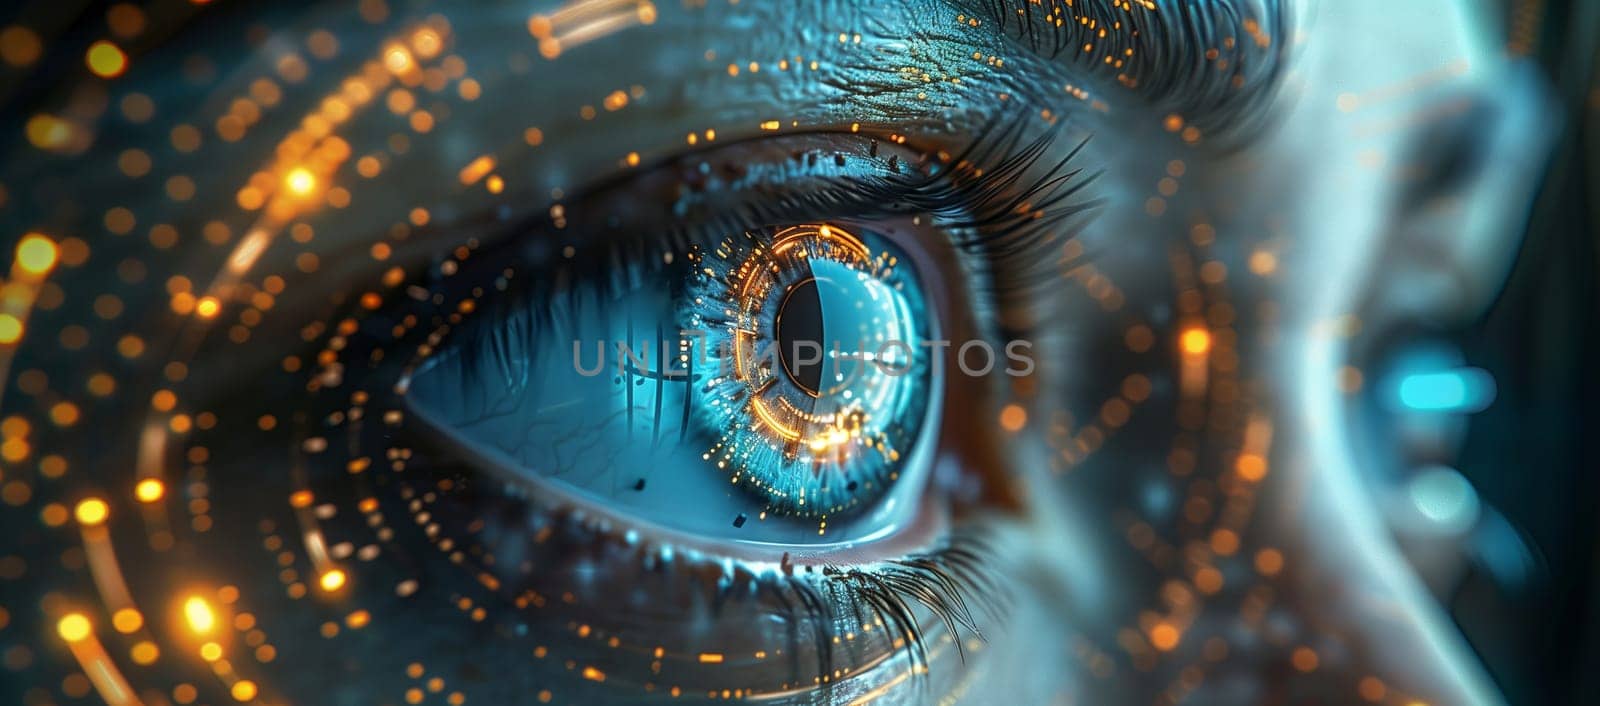 Macro photography of a womans eye with futuristic image projected on iris by richwolf